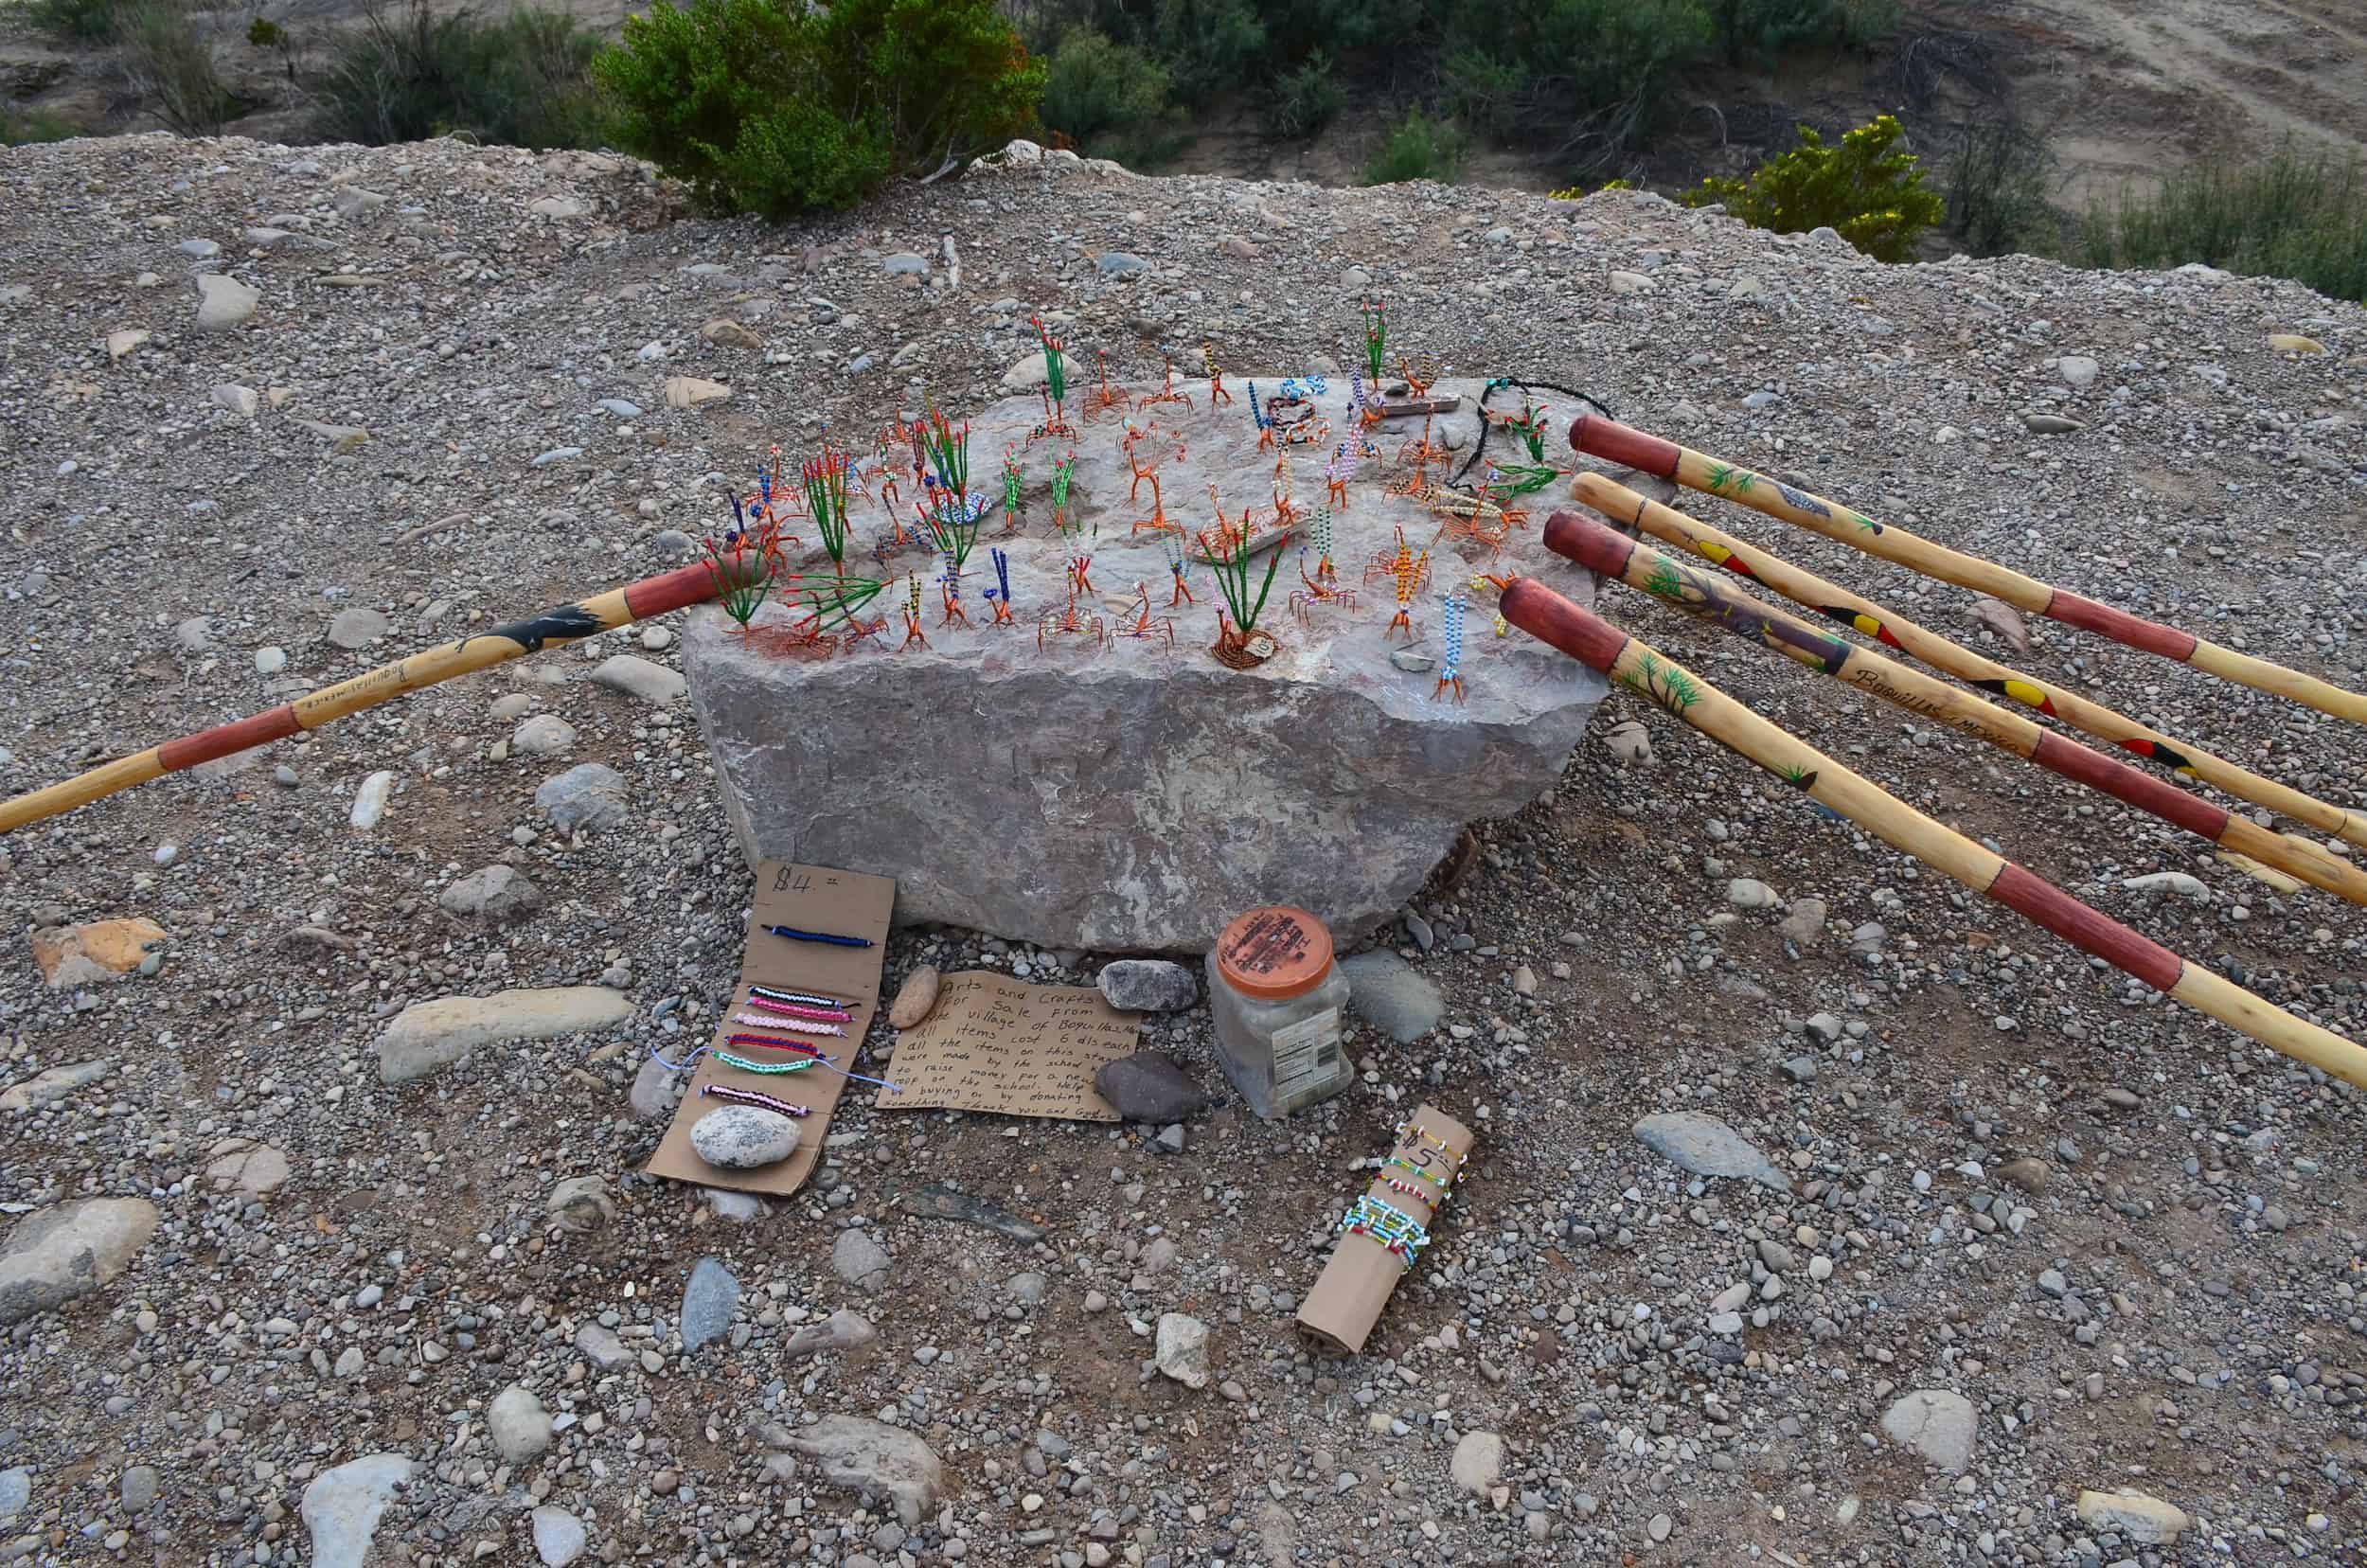 Crafts left by Mexican merchants at the Boquillas Overlook near Rio Grande Village at Big Bend National Park in Texas